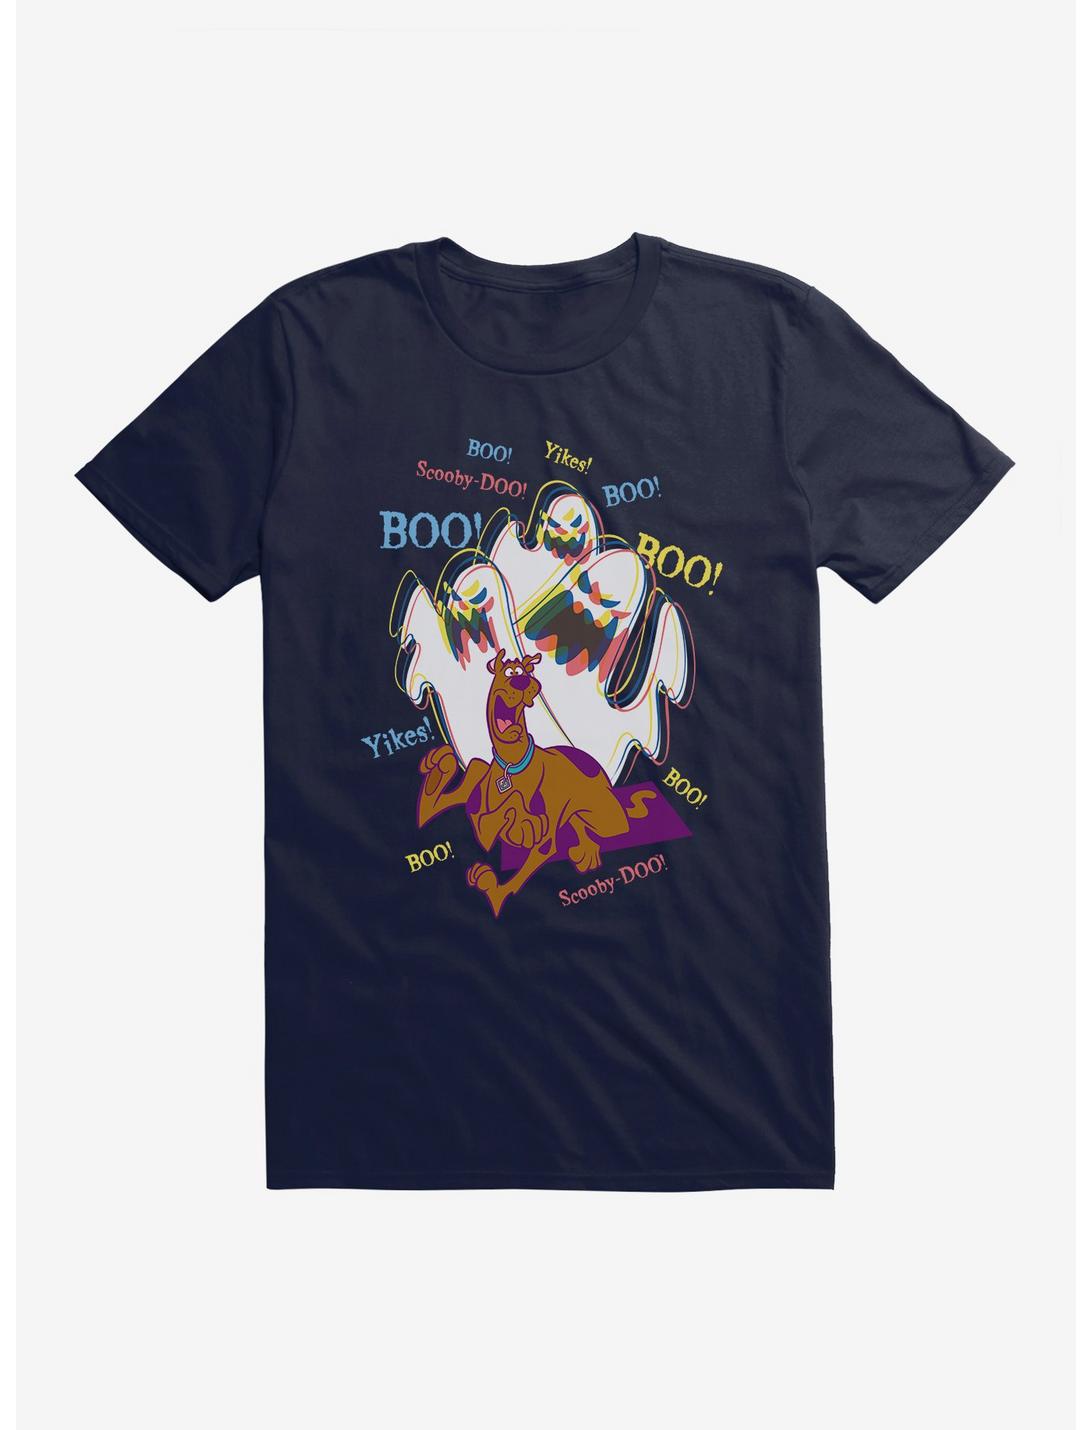 Scooby-Doo YIKES! Ghosts! T-Shirt, , hi-res